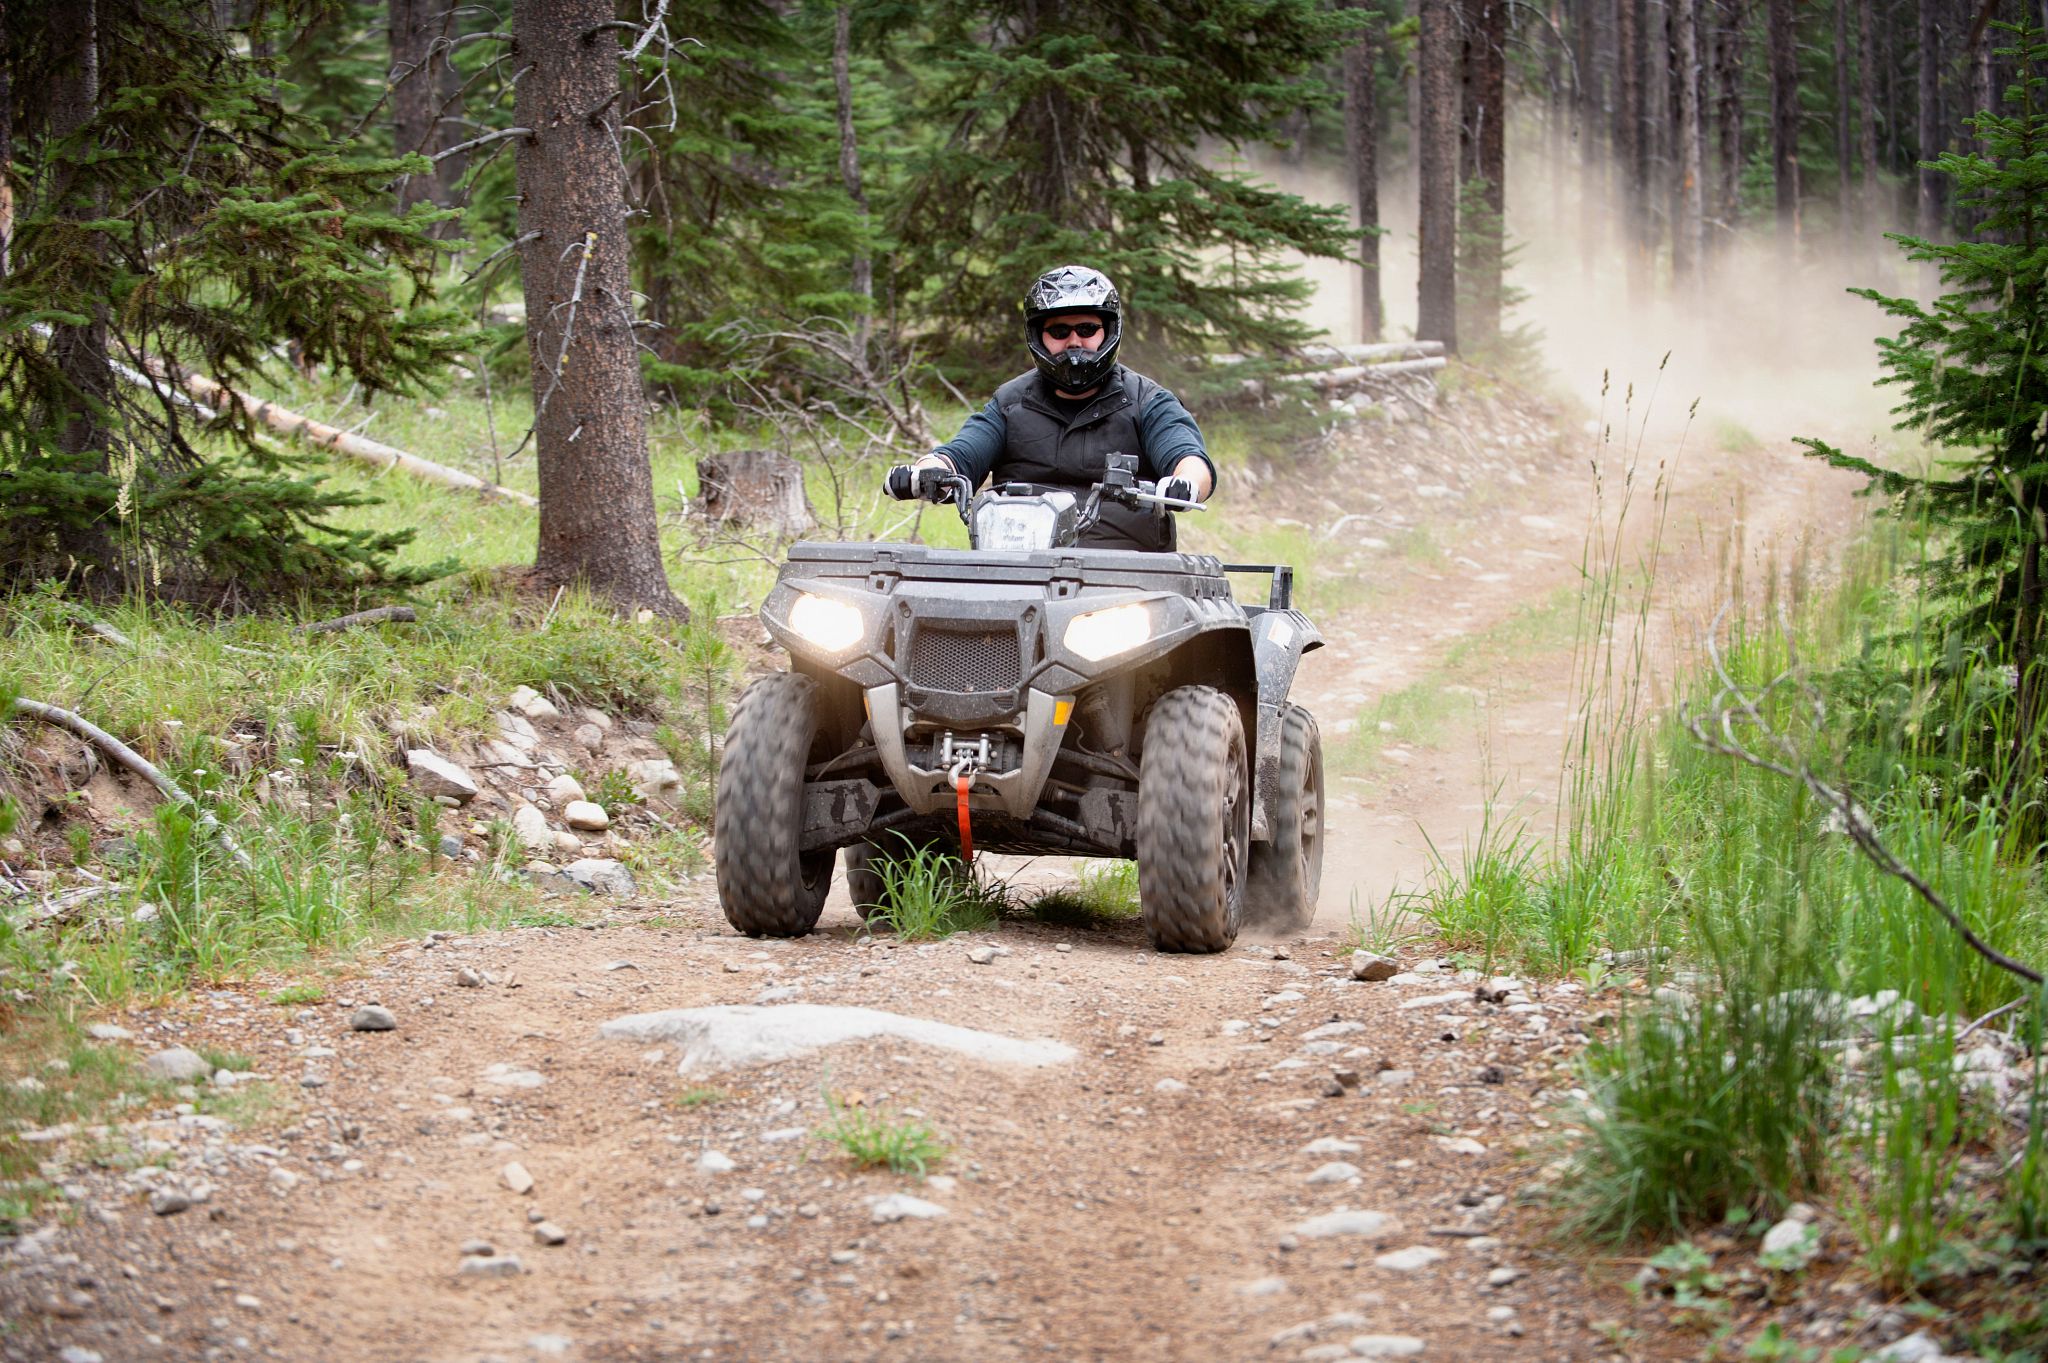 An image of a person riding an ATV on a dirt road in a forest. 